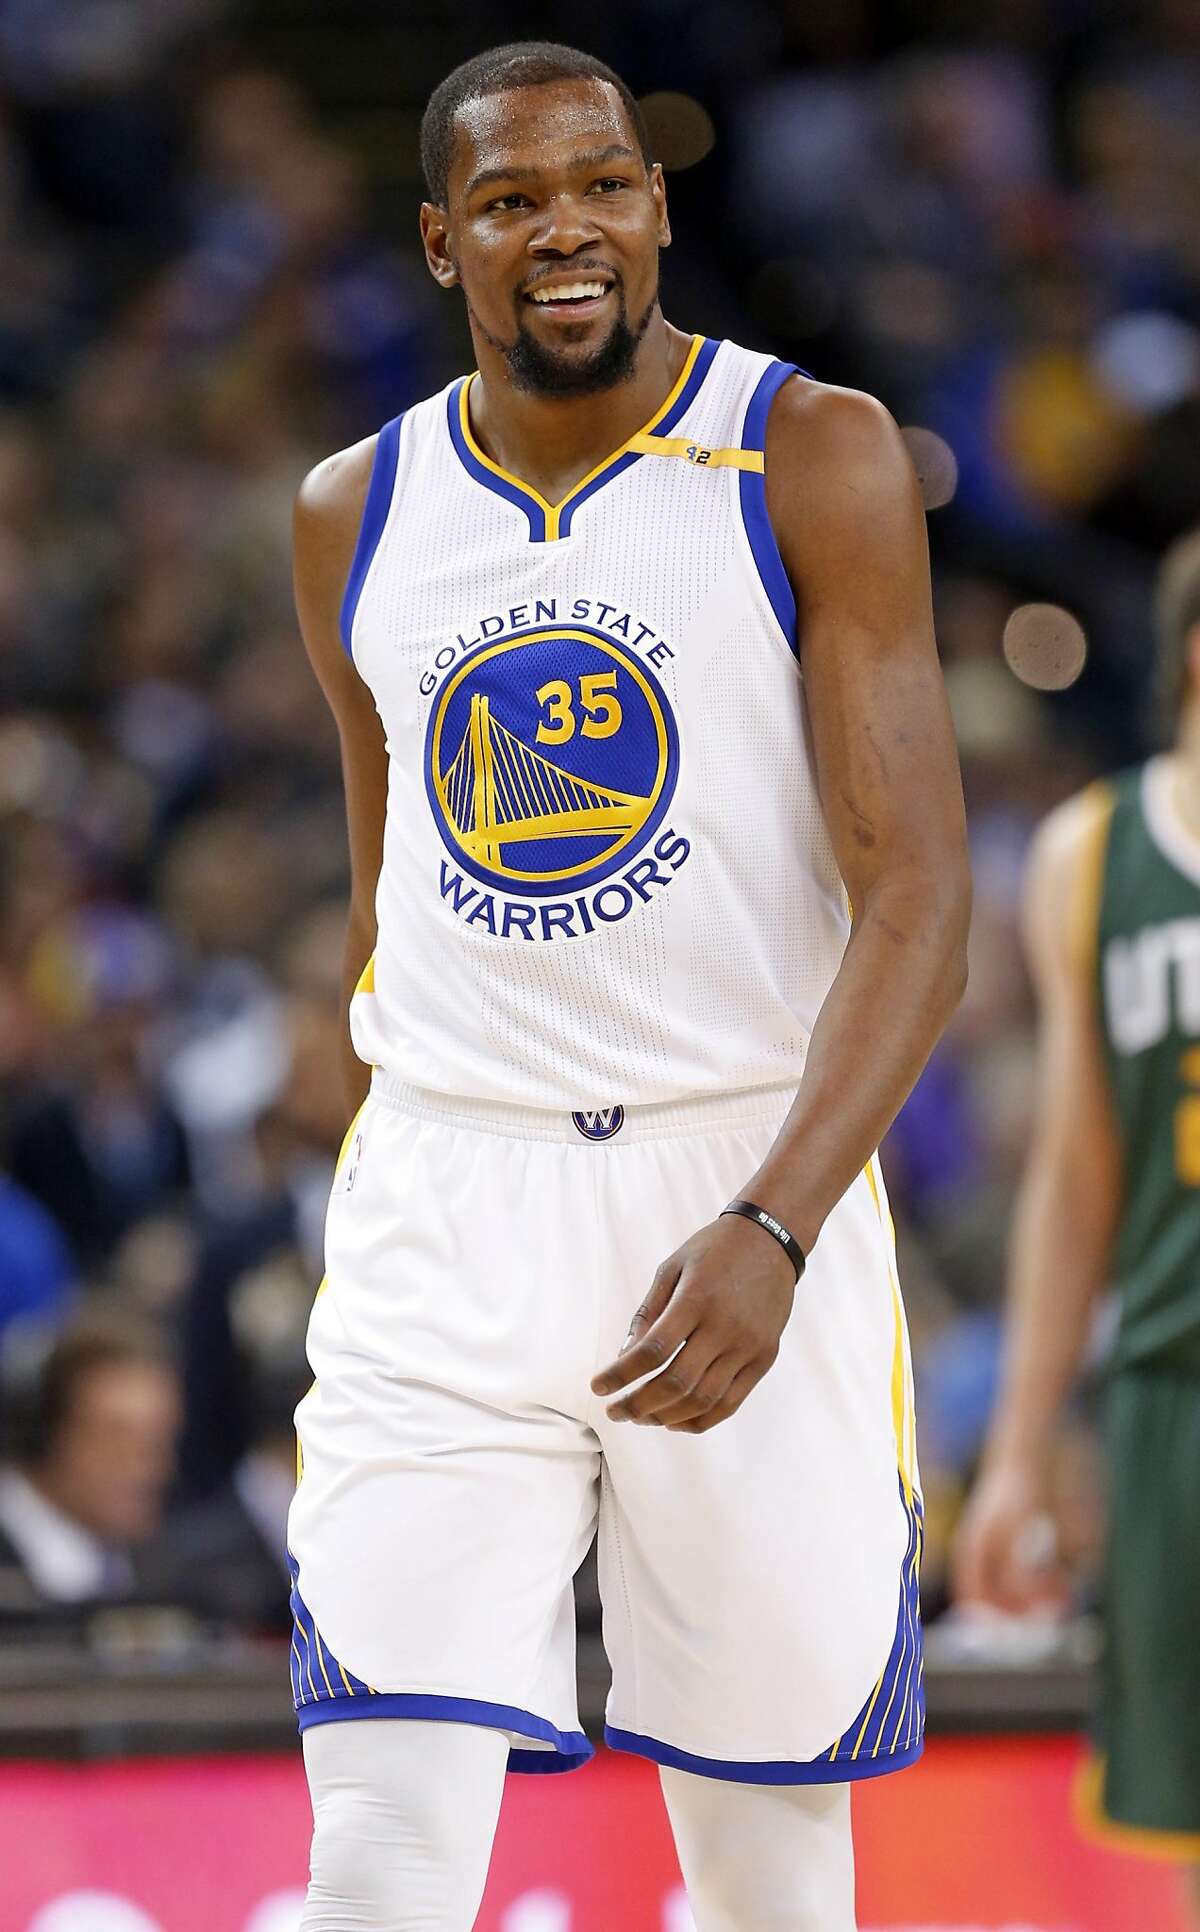 Golden State Warriors' Kevin Durant smiles in 1st quarter against Utah Jazz during NBA game at Oracle Arena in Oakland, Calif., on Tuesday, December 20, 2016.